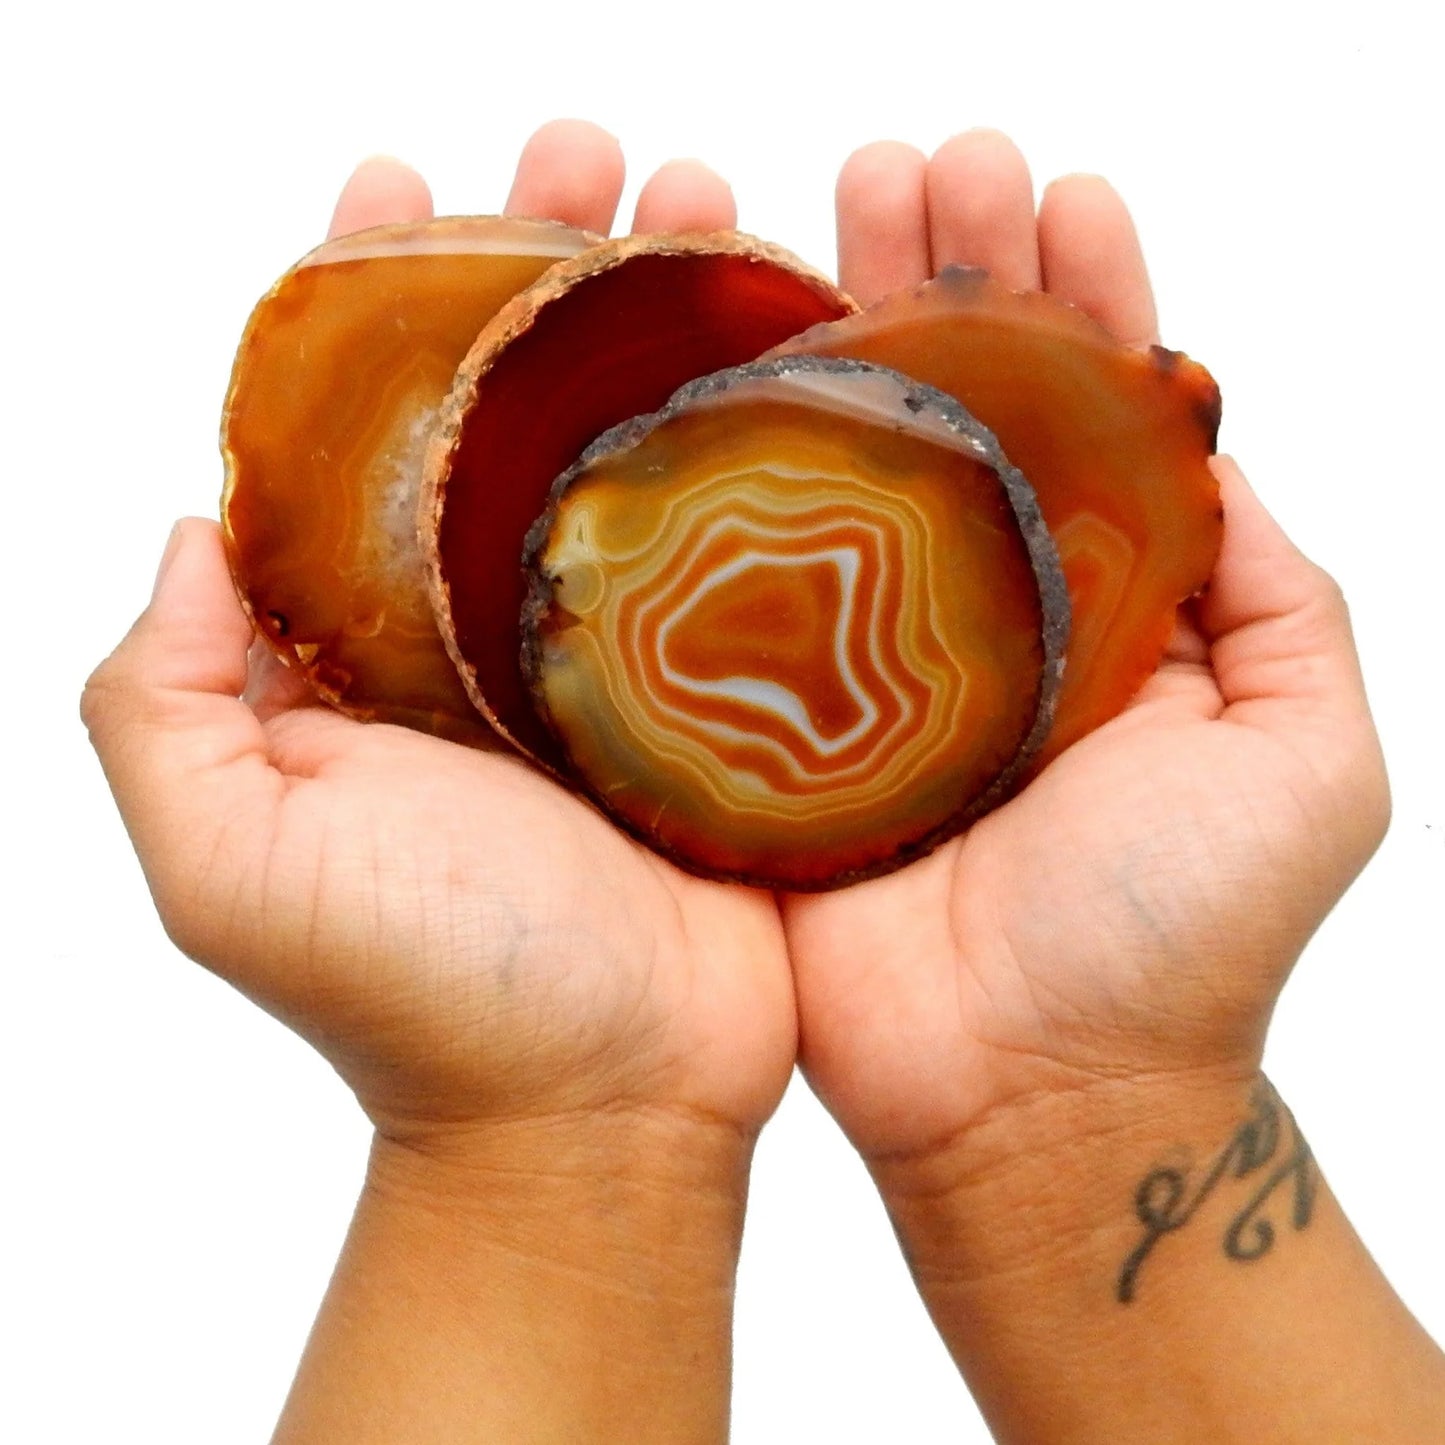 " Survival is bravery, too." | Agate Slice Shelf Sitter | Multiple colors available